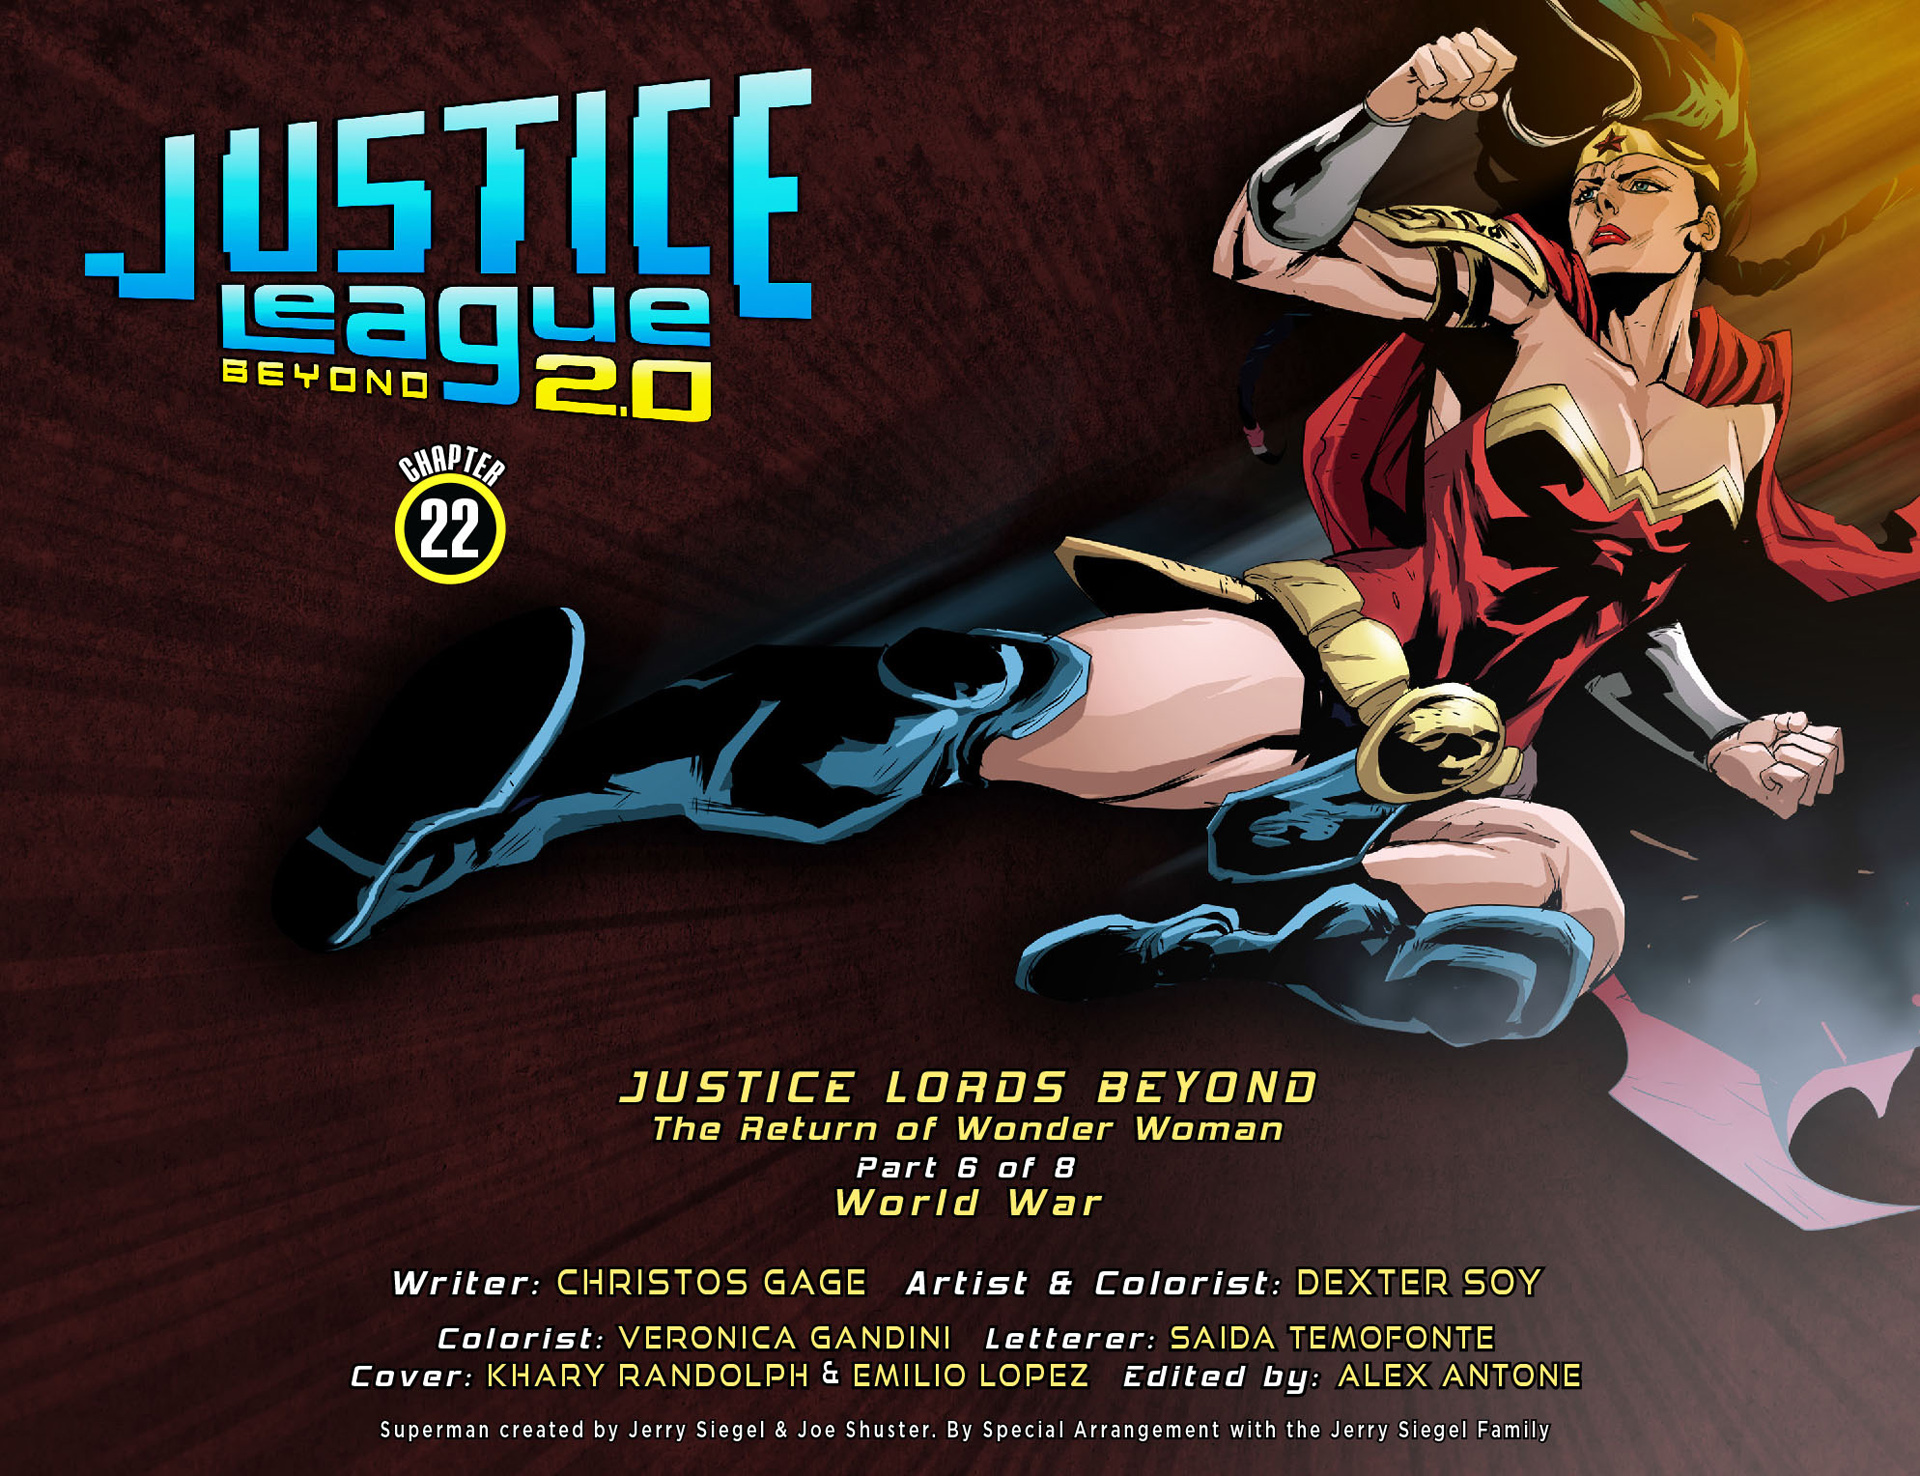 Read online Justice League Beyond 2.0 comic -  Issue #22 - 2